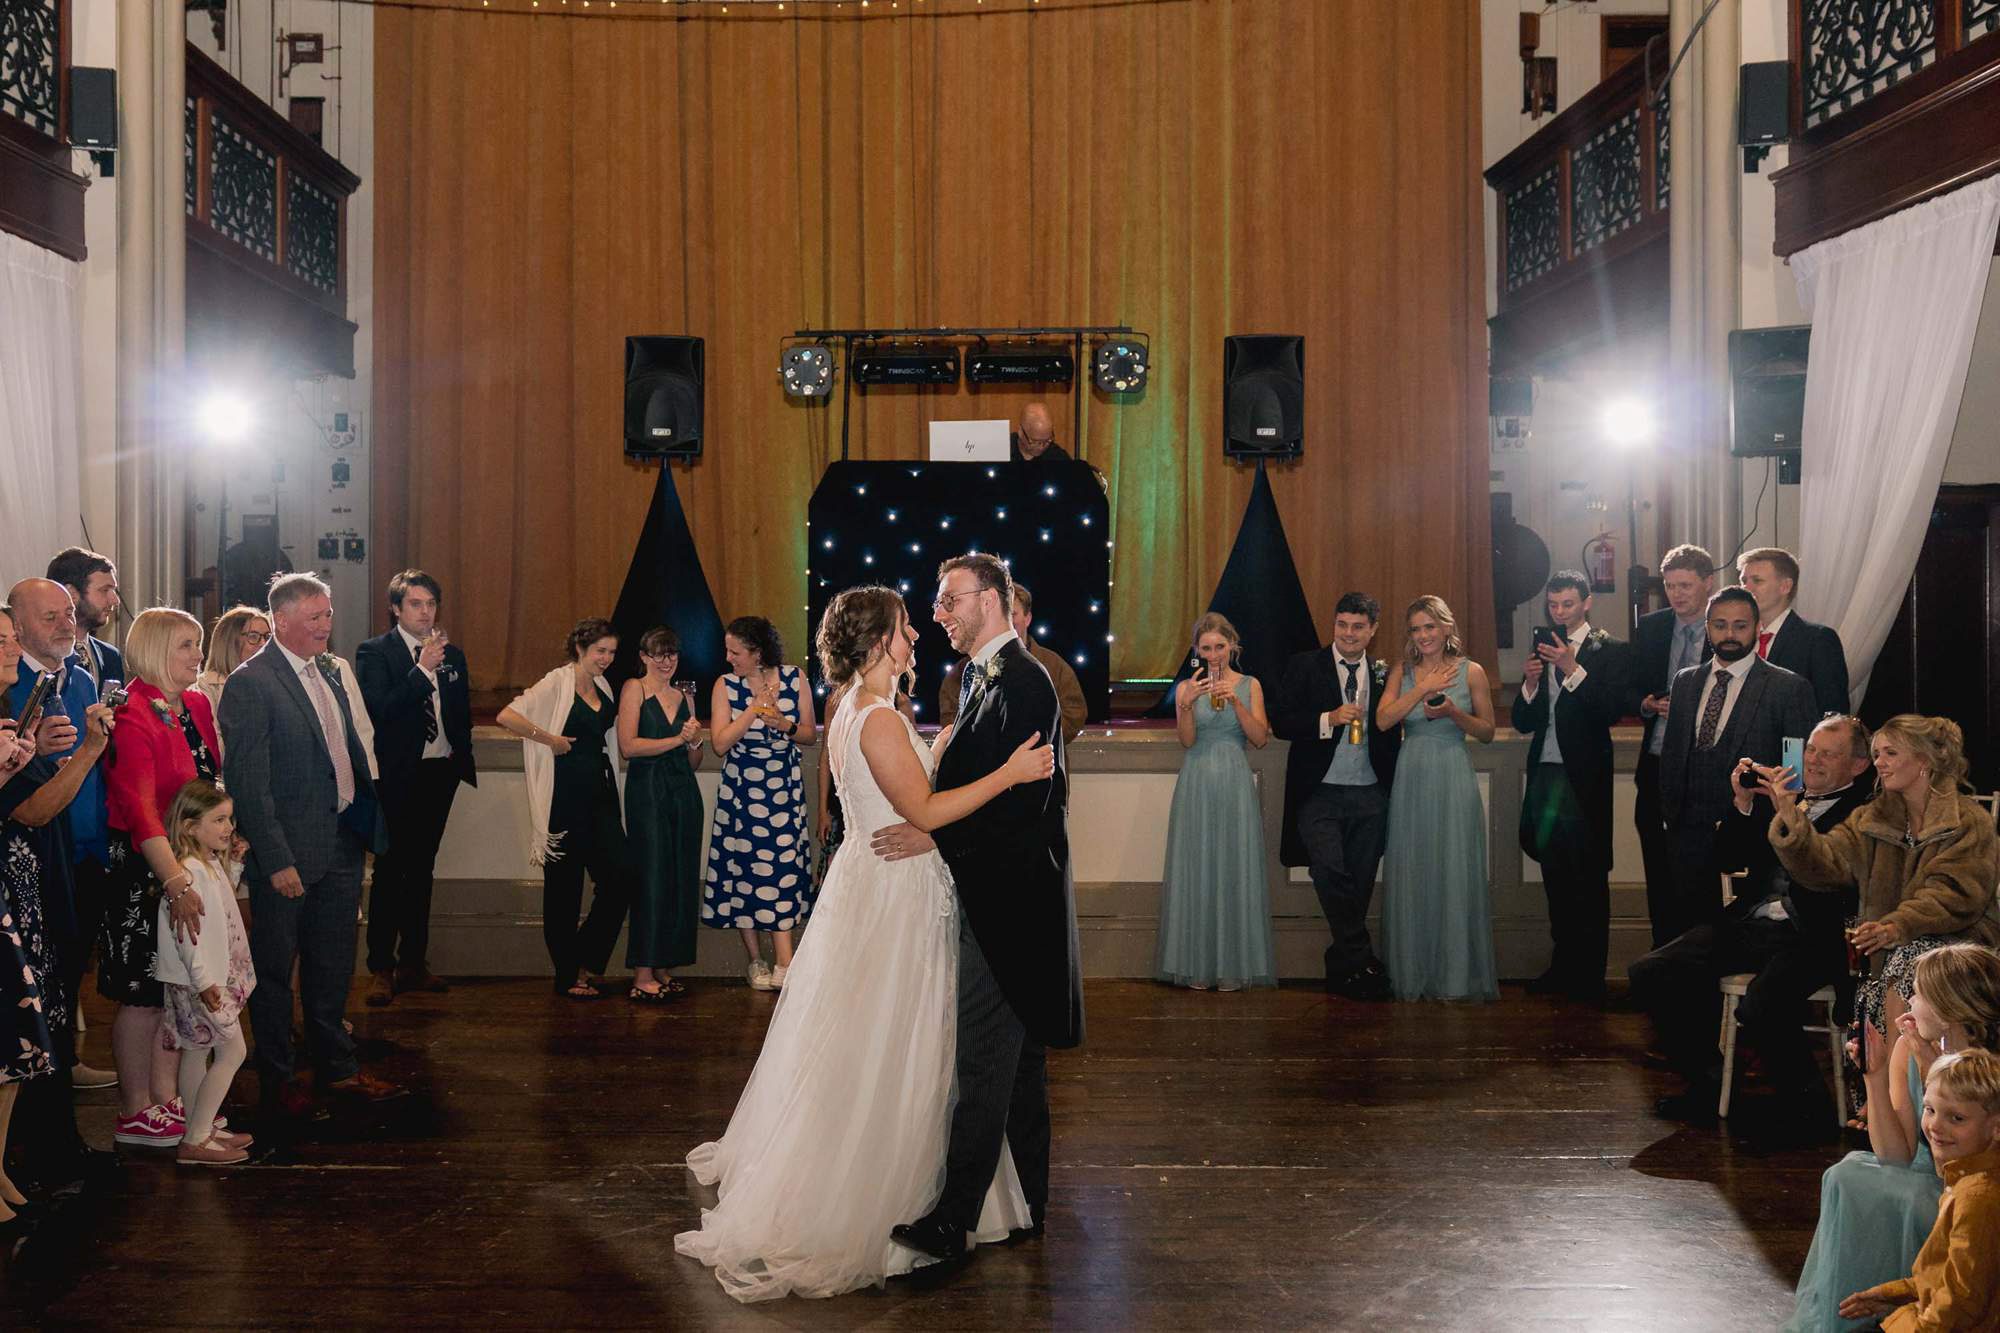 Bride and groom have their first dance together on their wedding day at Salomons Estate in Tunbridge Wells.